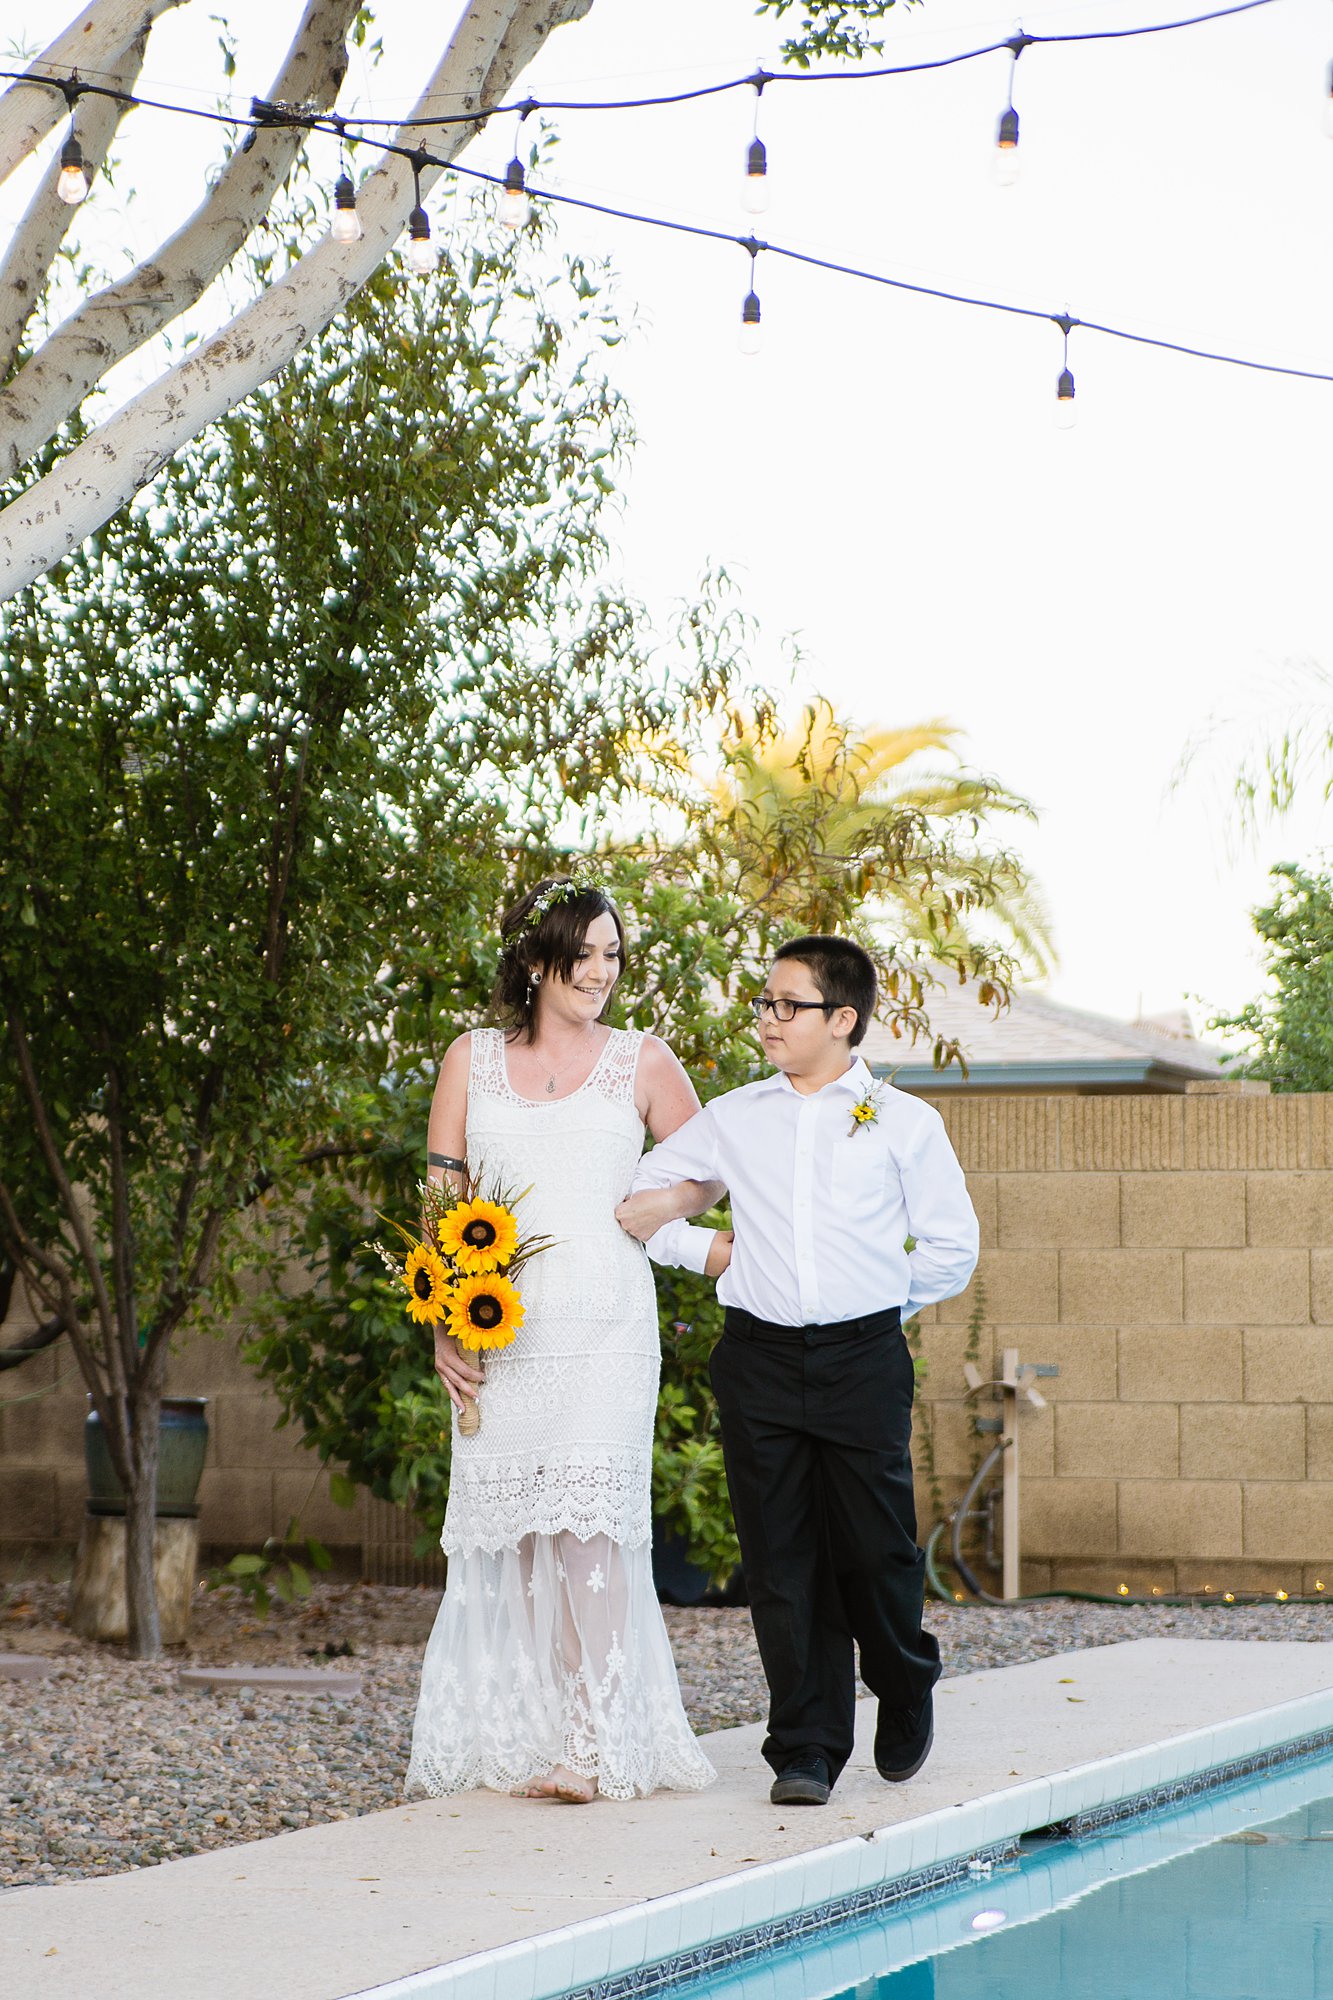 Bride being walked down the aisle by her son for her backyard garden wedding by PMA Photography.